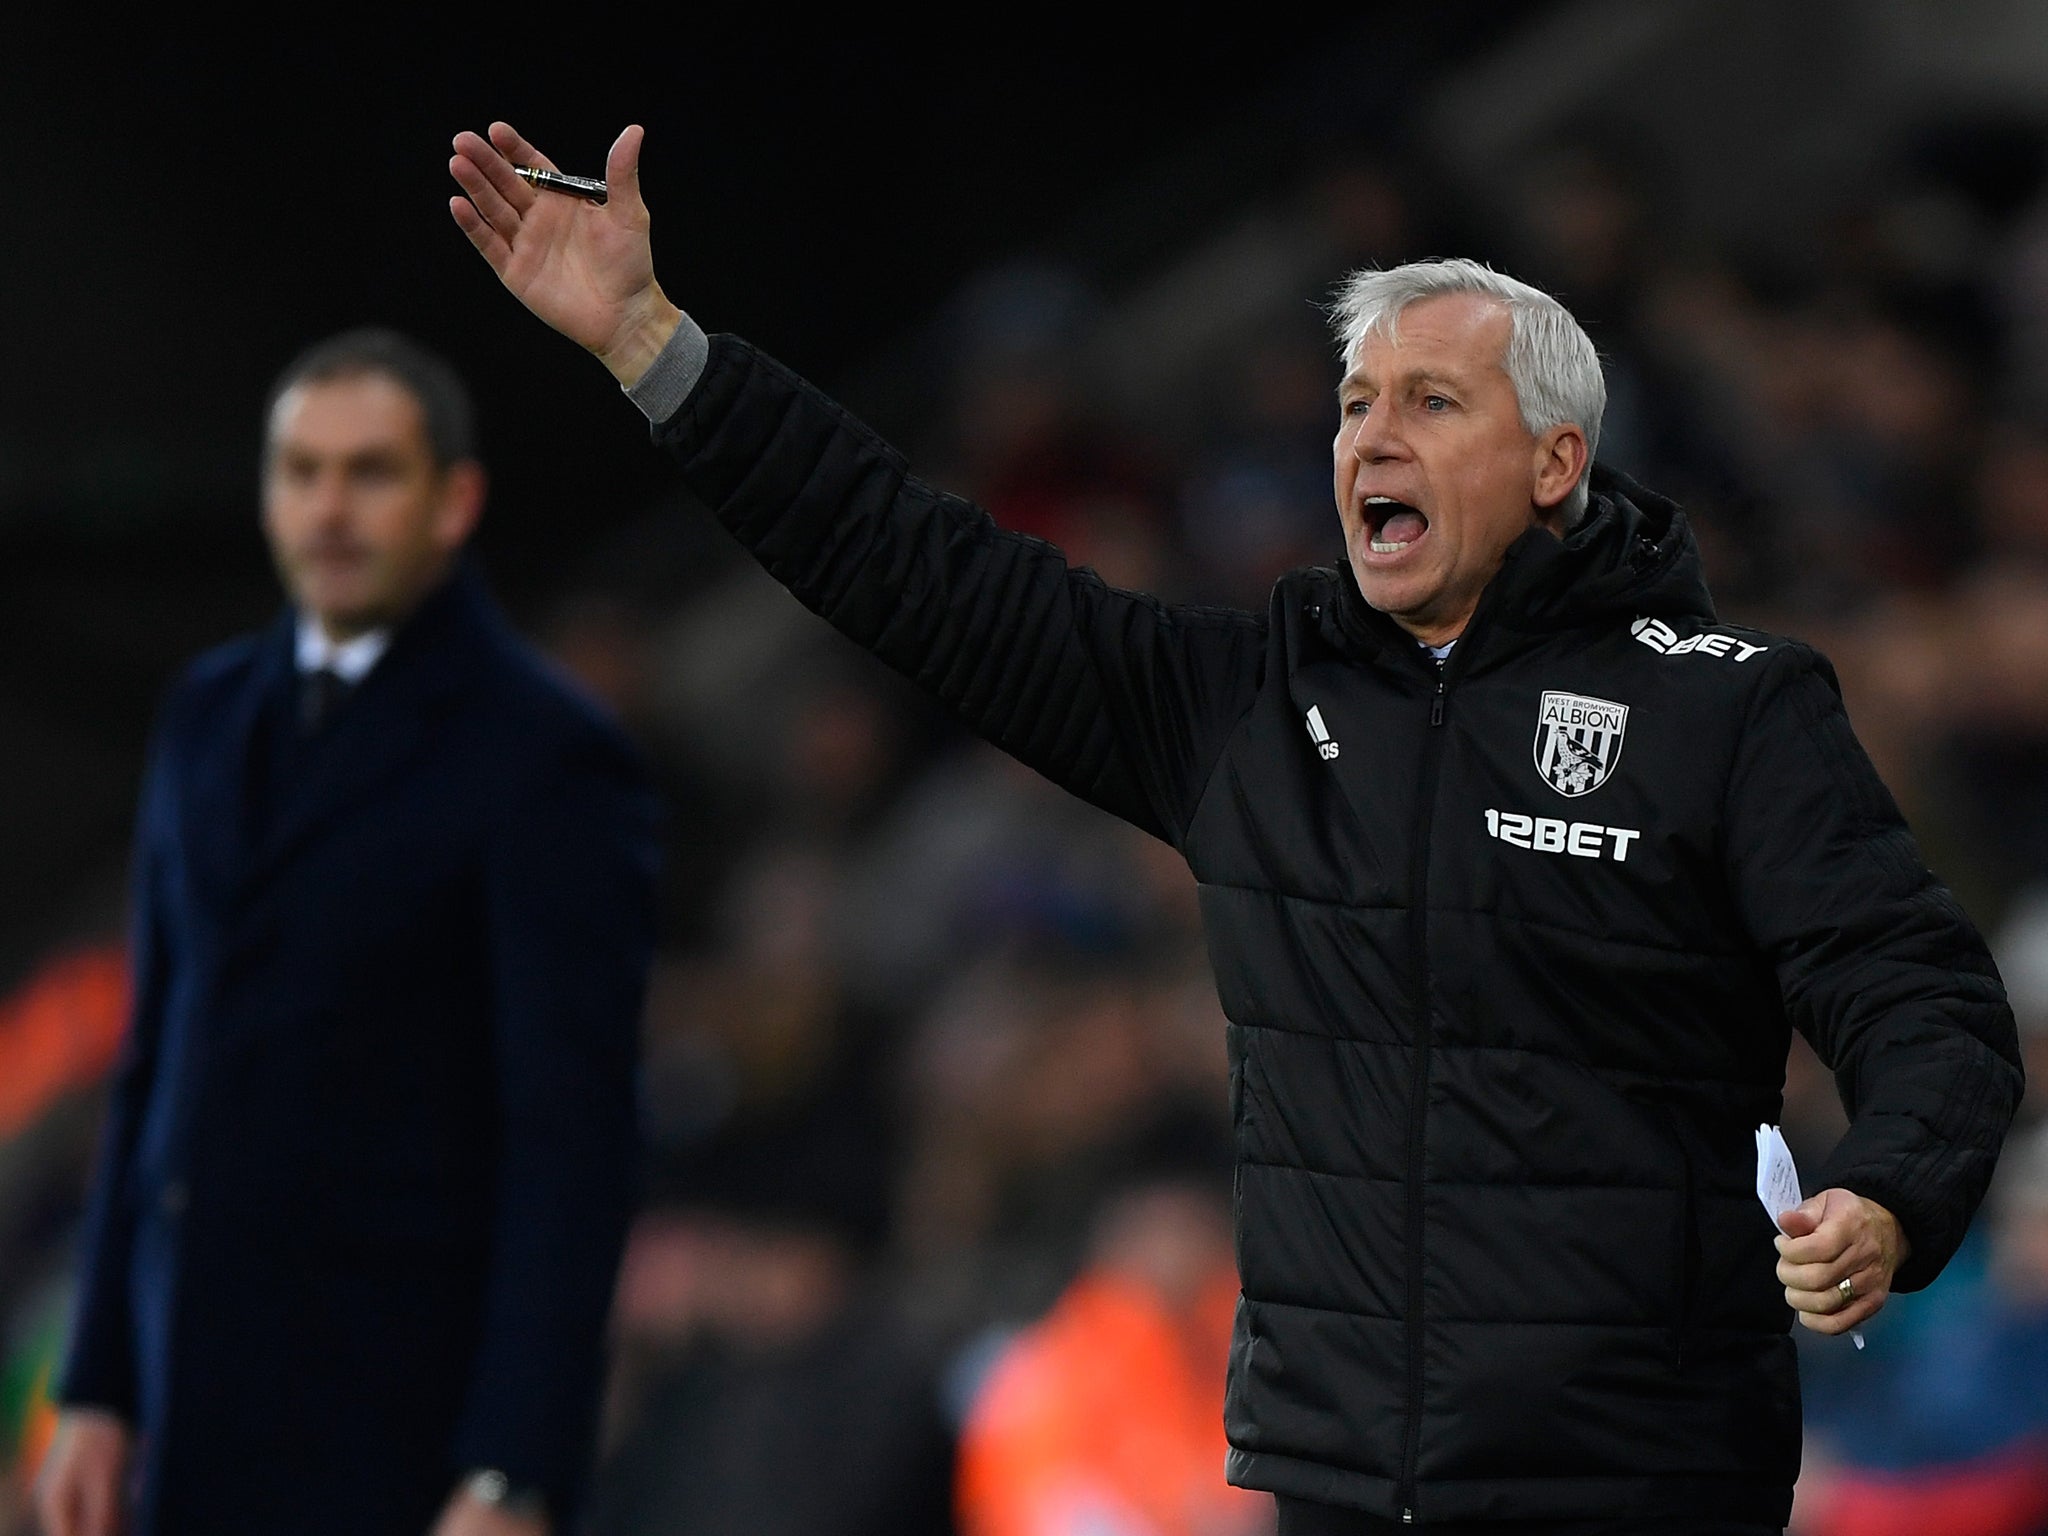 Alan Pardew appeals from the sidelines